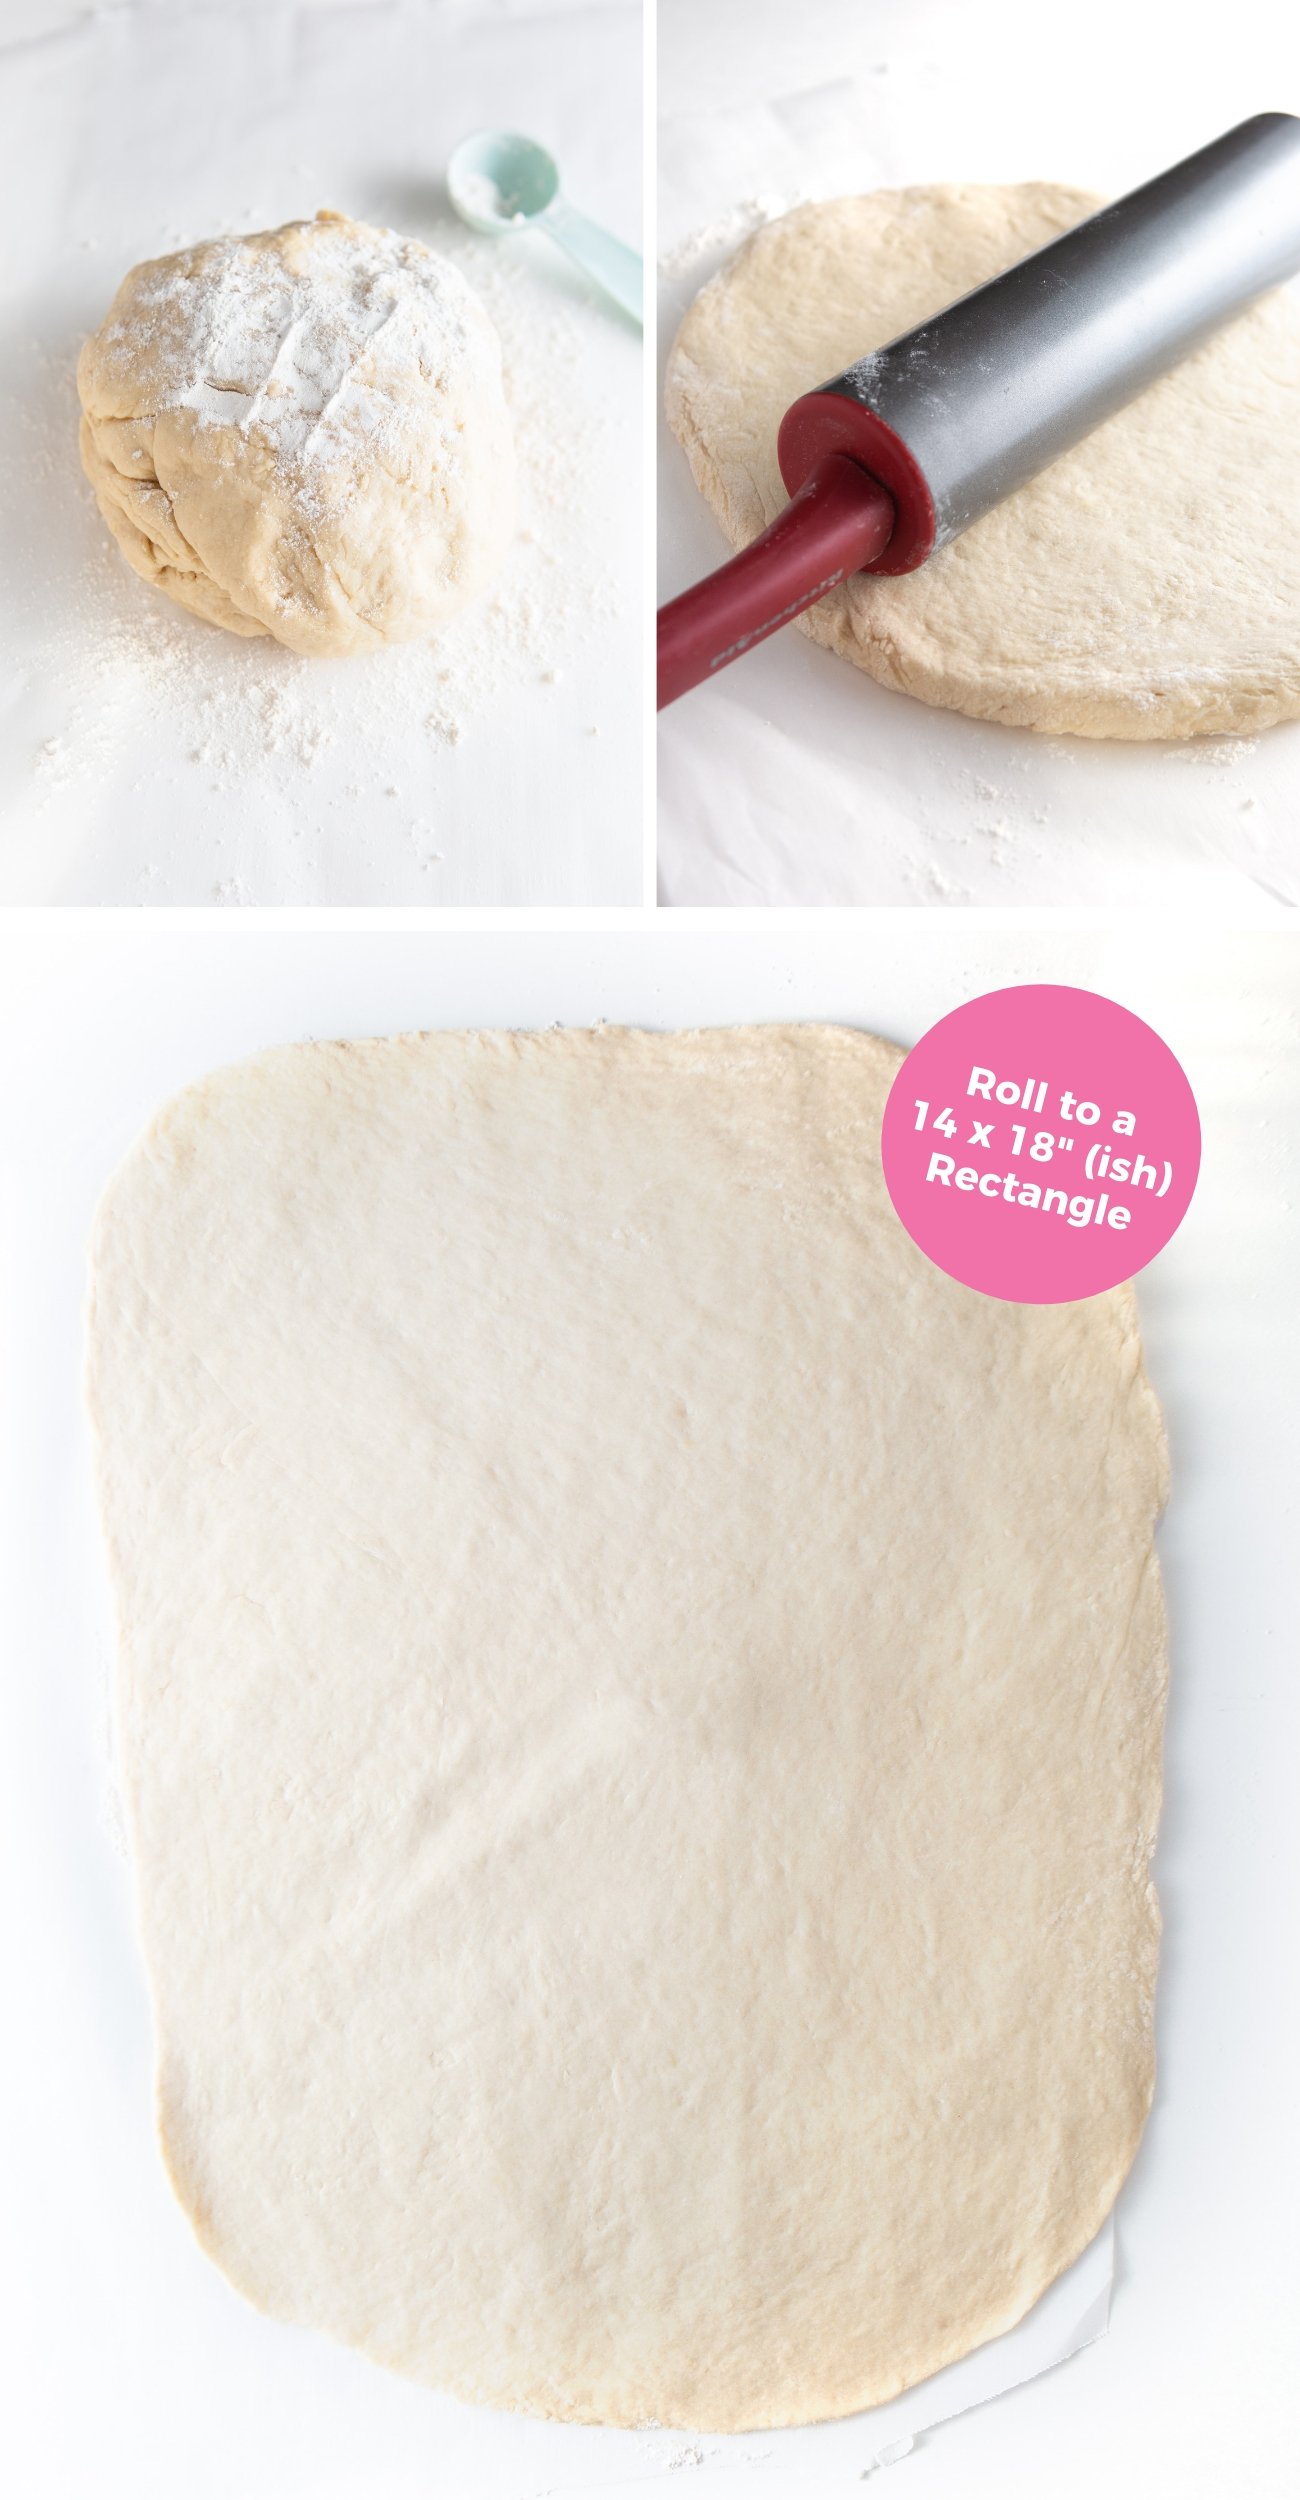 How to roll cinnamon roll dough into 14x18 rectangle sheet with rolling pin